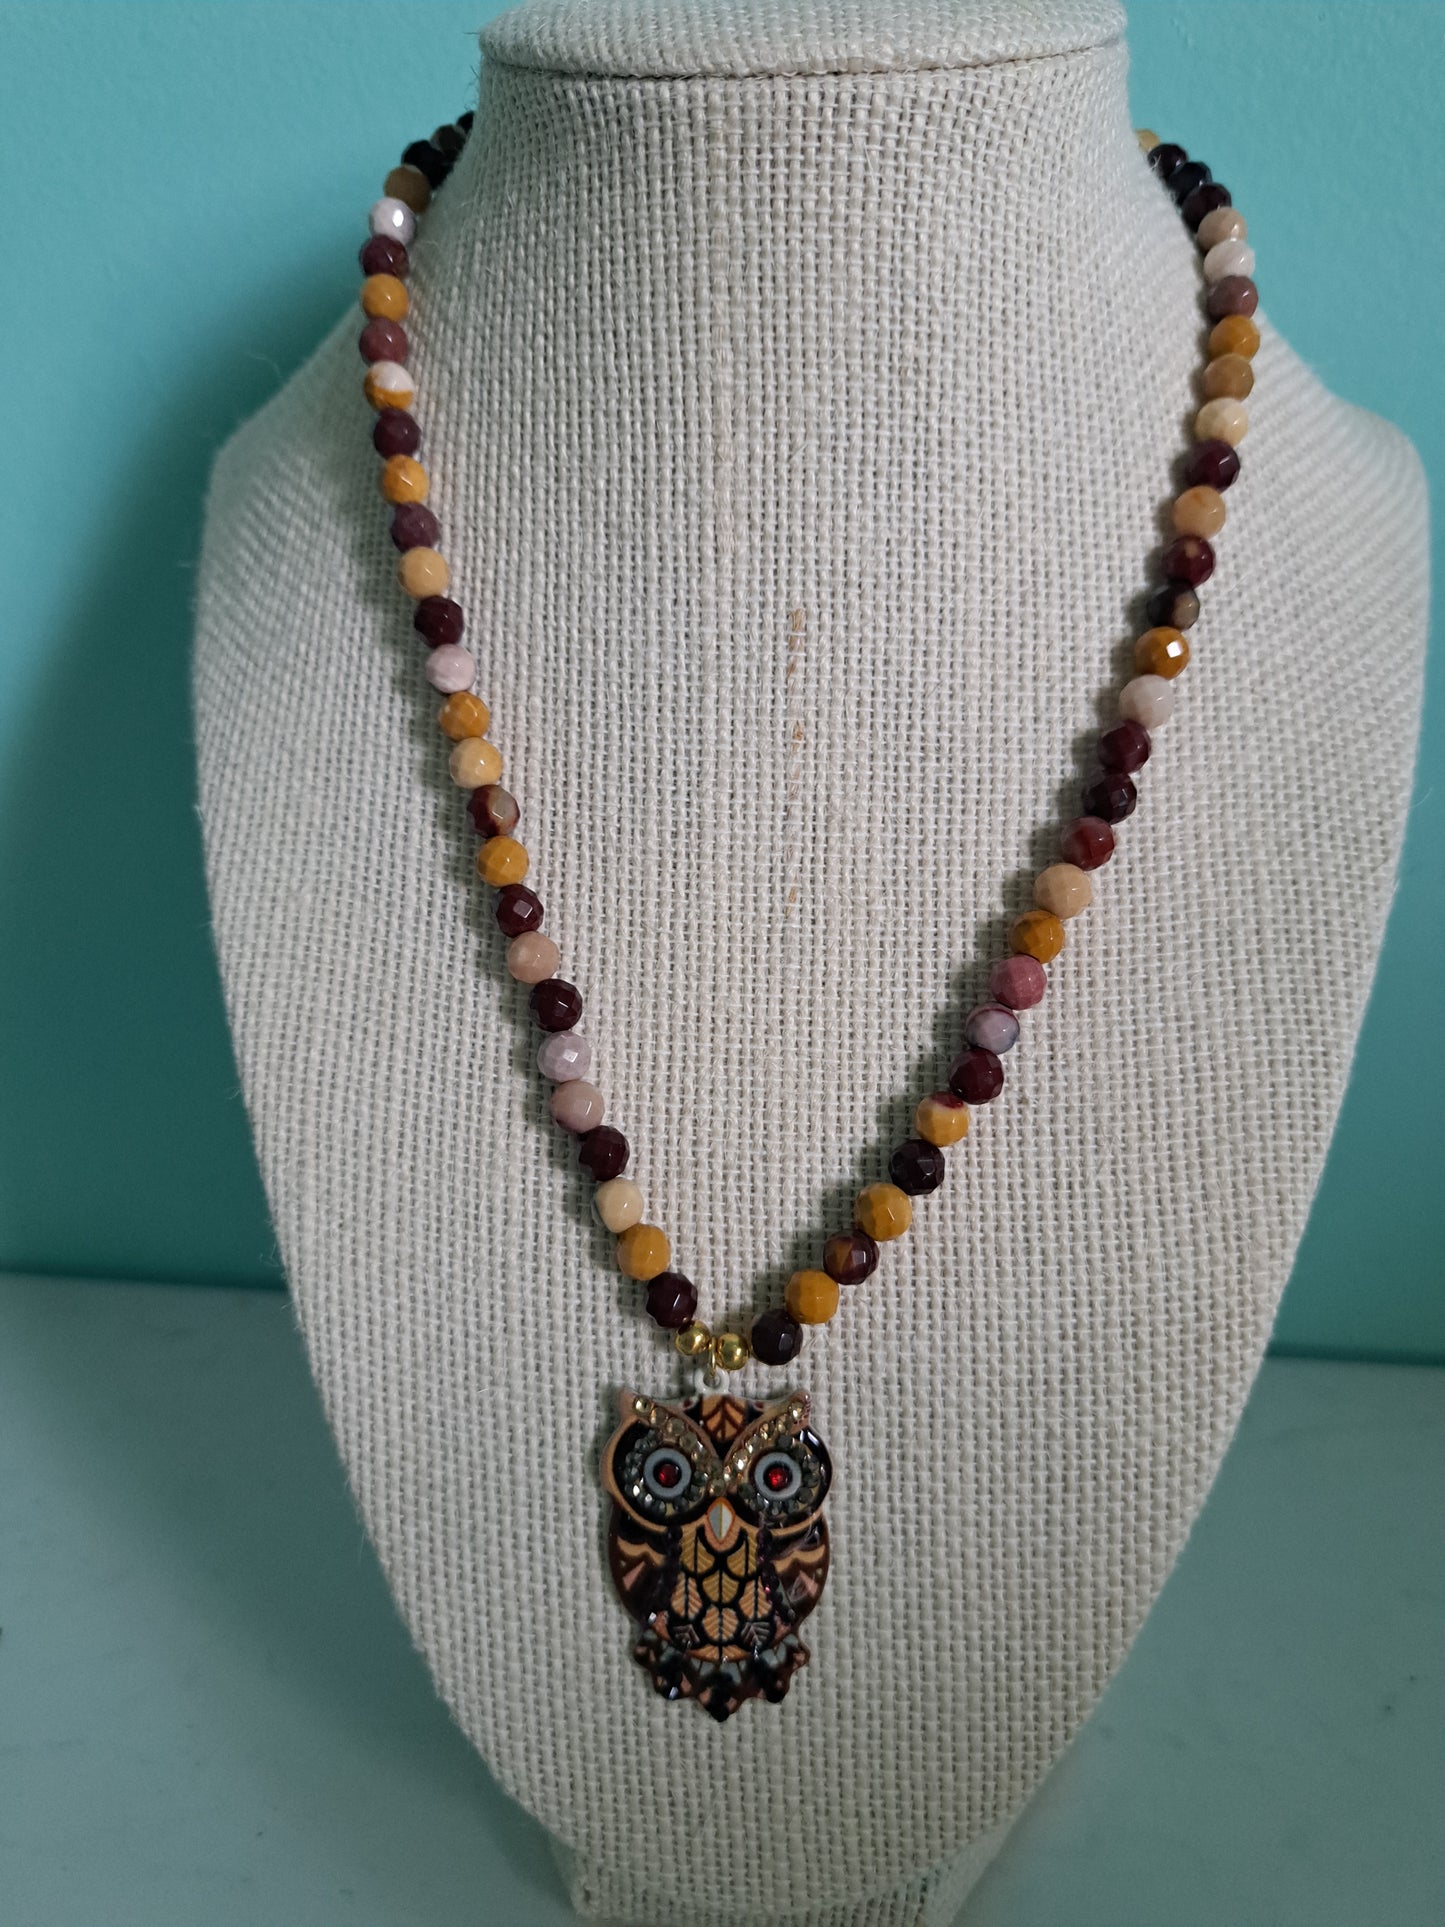 Mookaite Jasper with Owl Charm Necklace